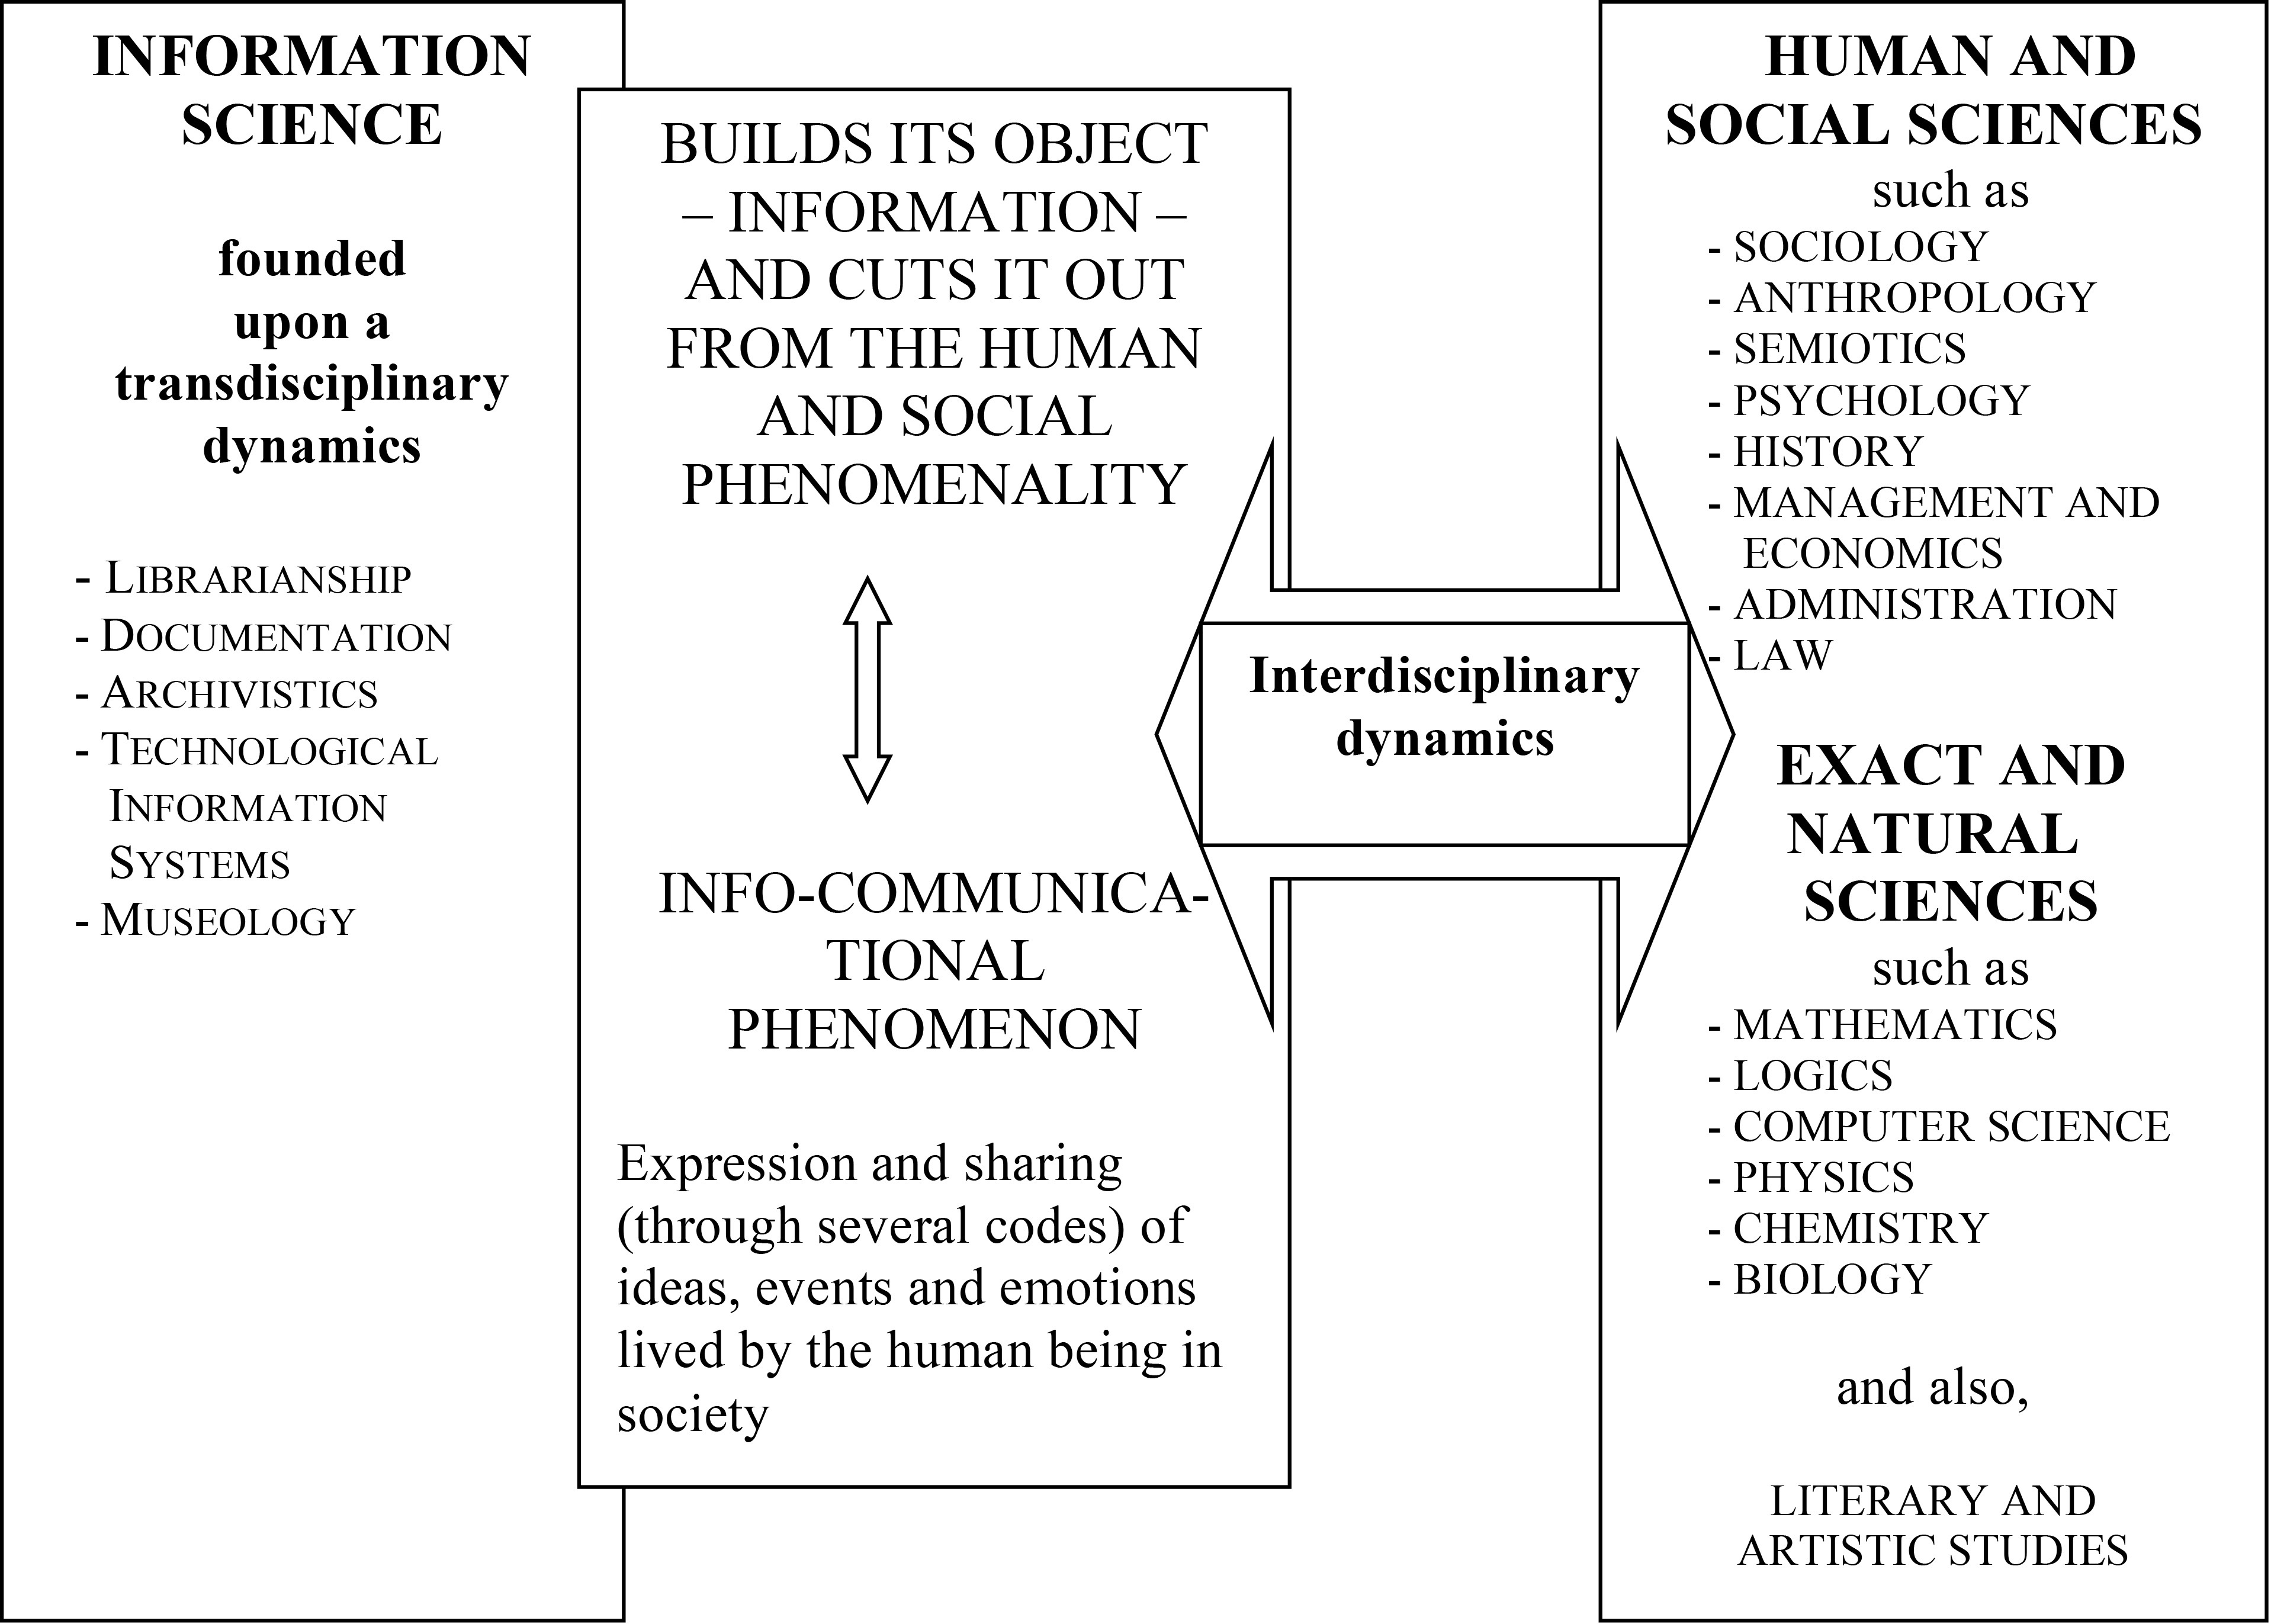 Diagram of the trans and interdisciplinary construction of Information Science (adapted from Silva, 2006, p. 28).